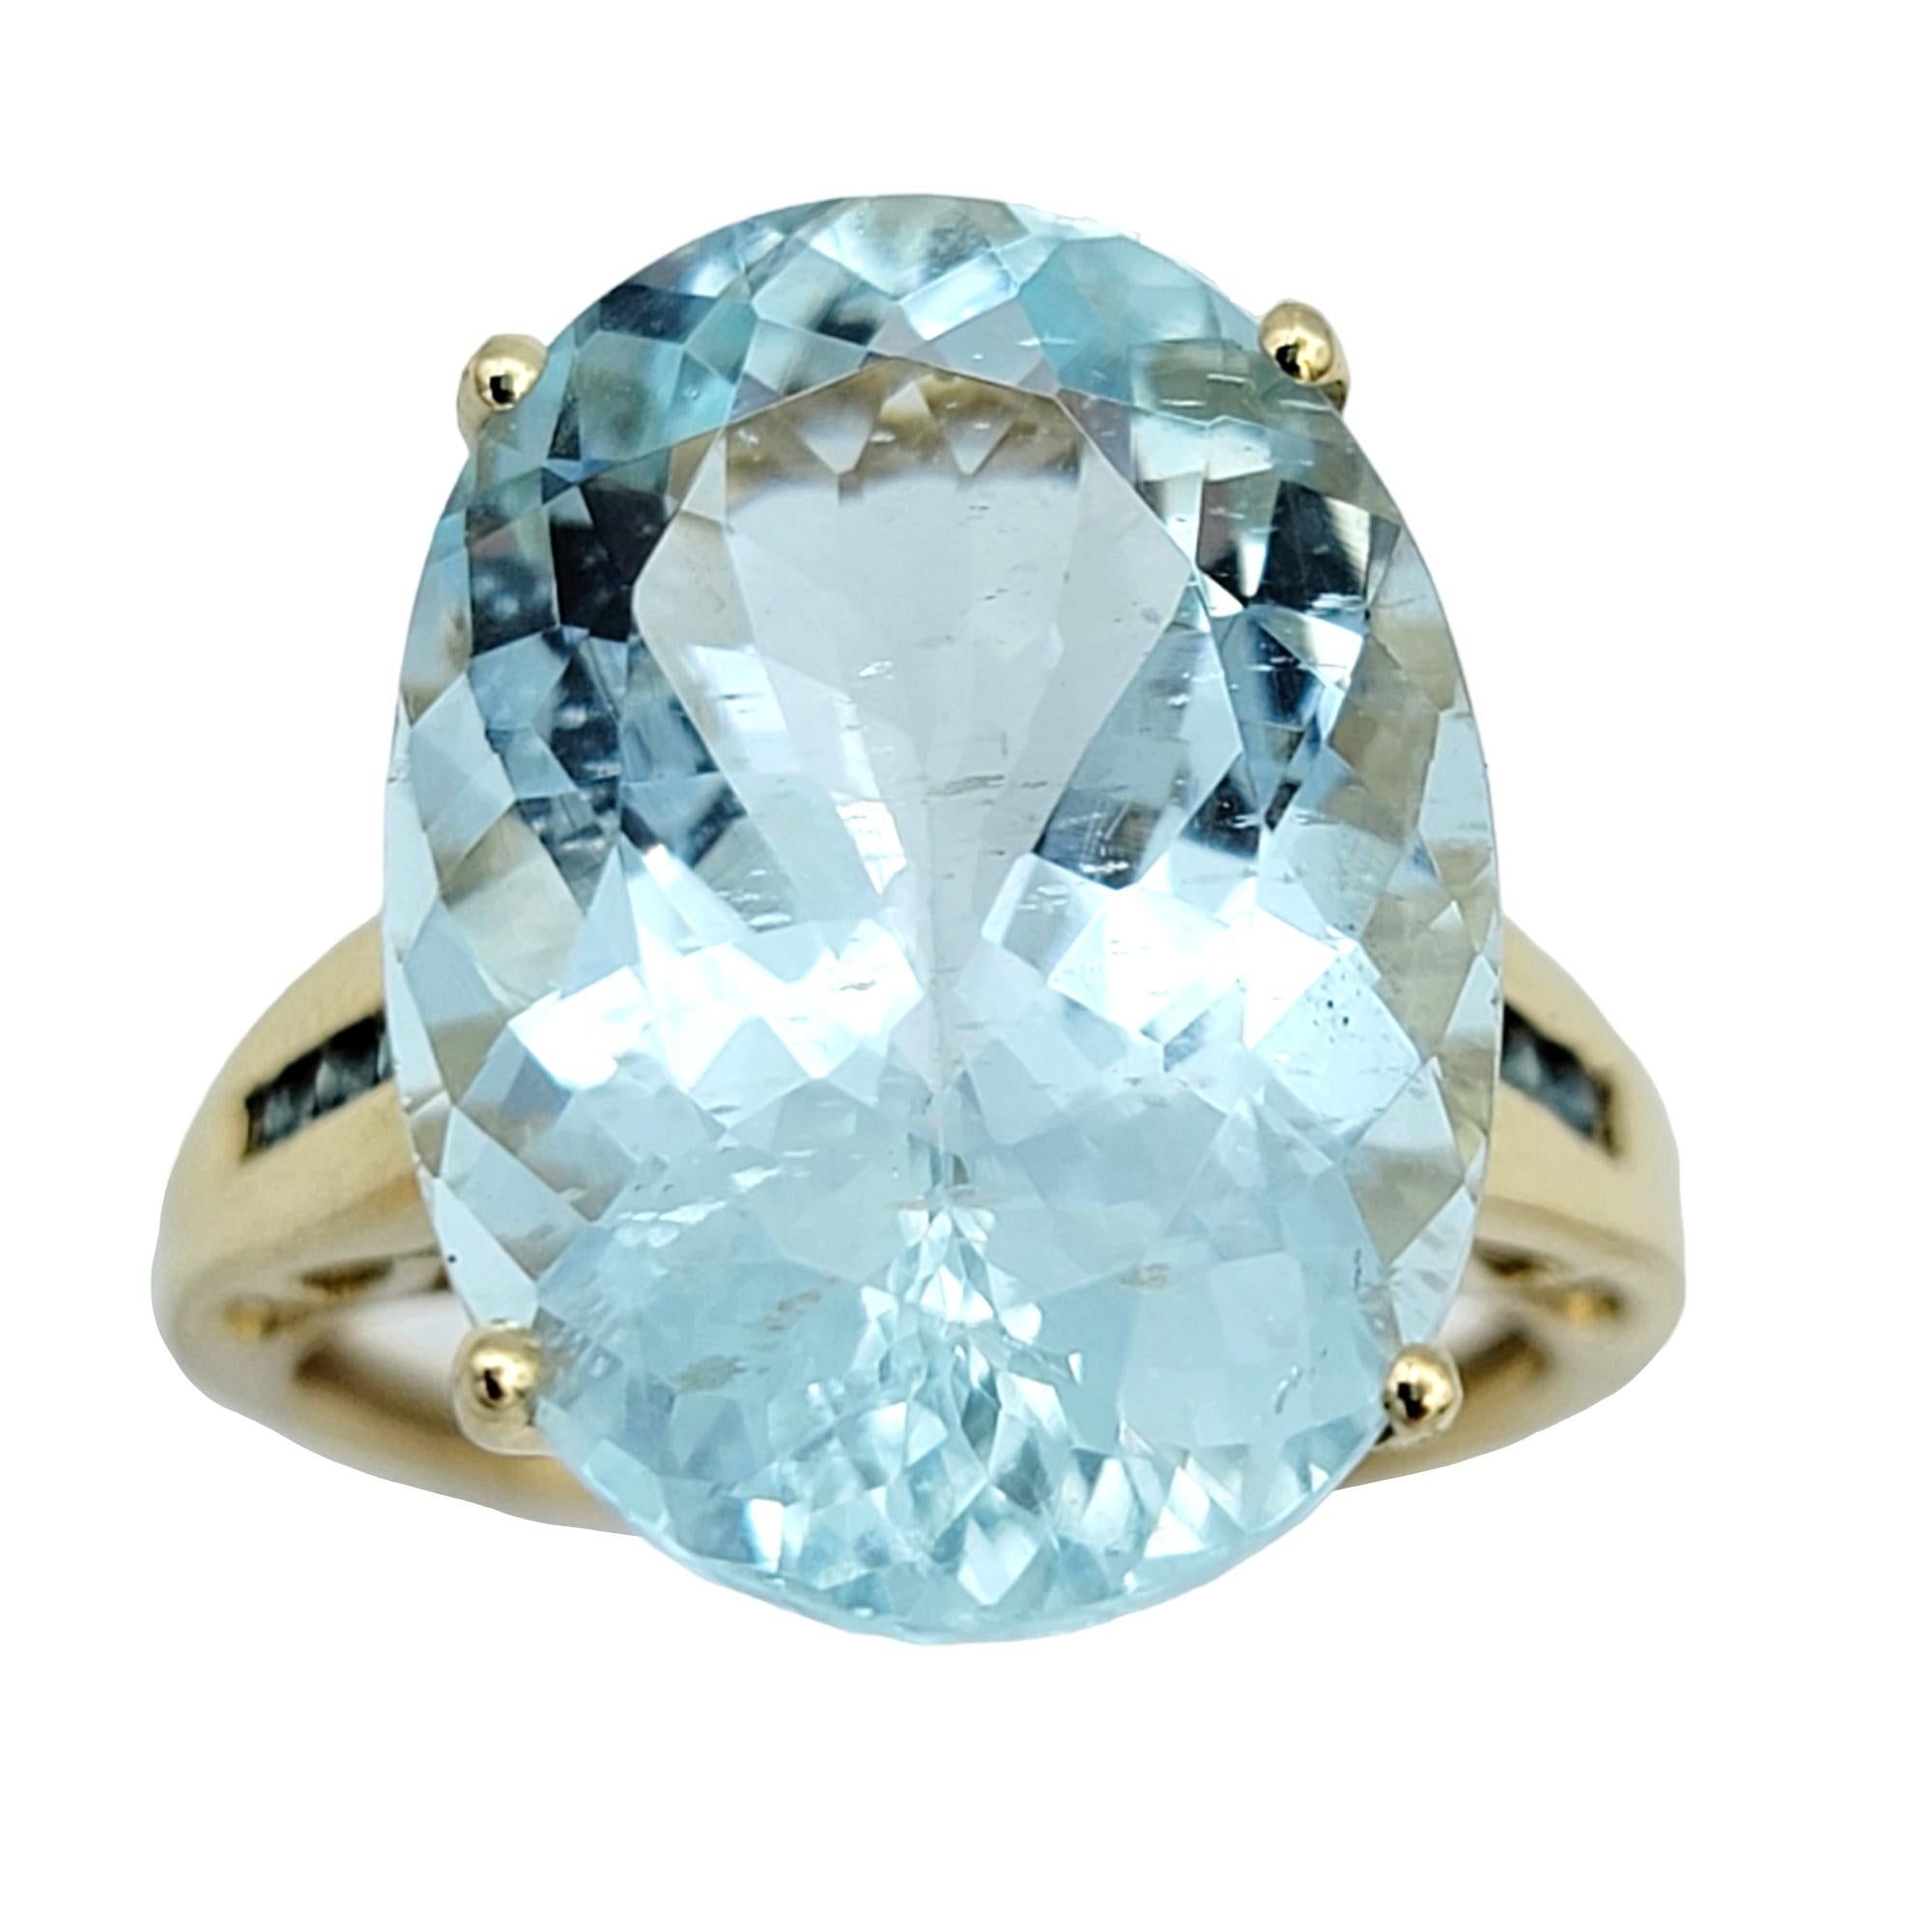 Ring size: 7

Shown here is a dazzling and eye-catching aquamarine cocktail ring. This stunning statement piece effortlessly captures attention with its mesmerizing icy-blue hue and detailed 14 karat yellow gold band.

At the heart of the piece lies